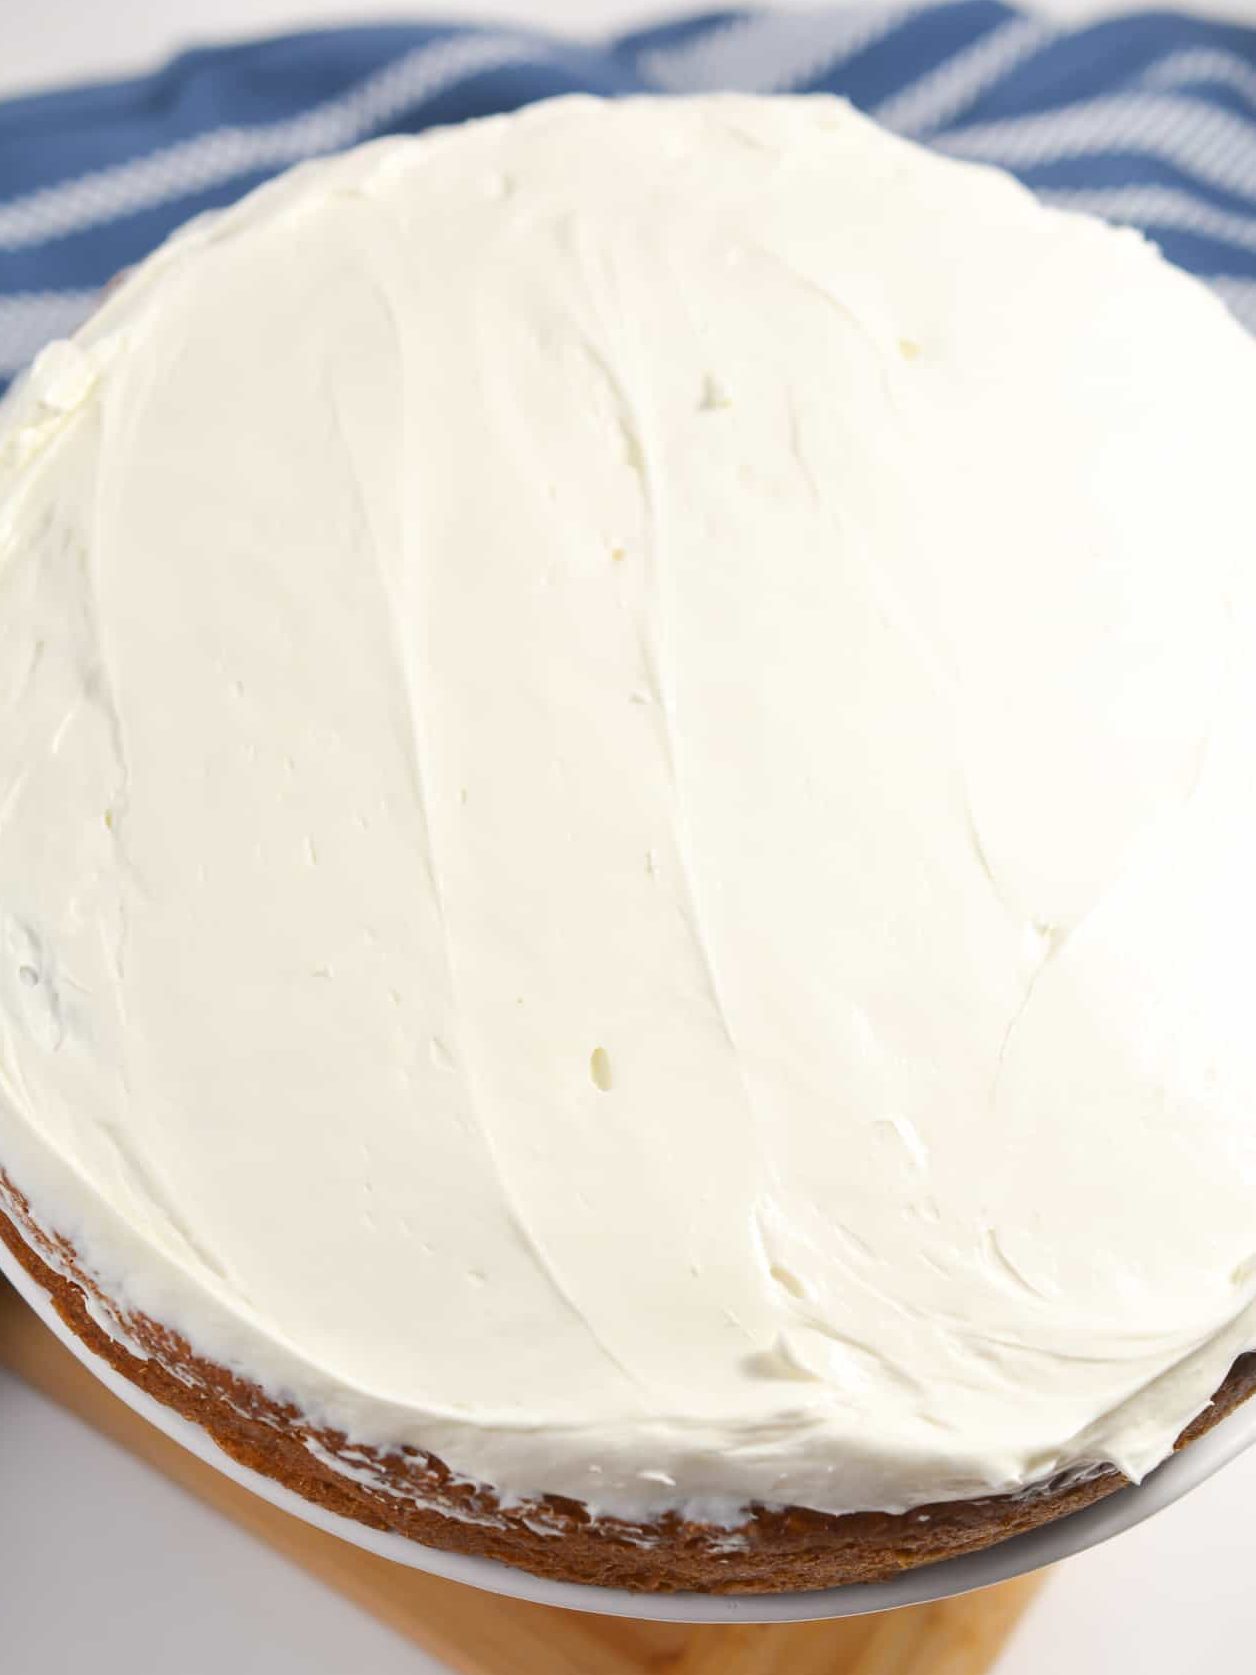 Place a layer of cake onto a tray or serving dish, then top with a layer of the frosting.